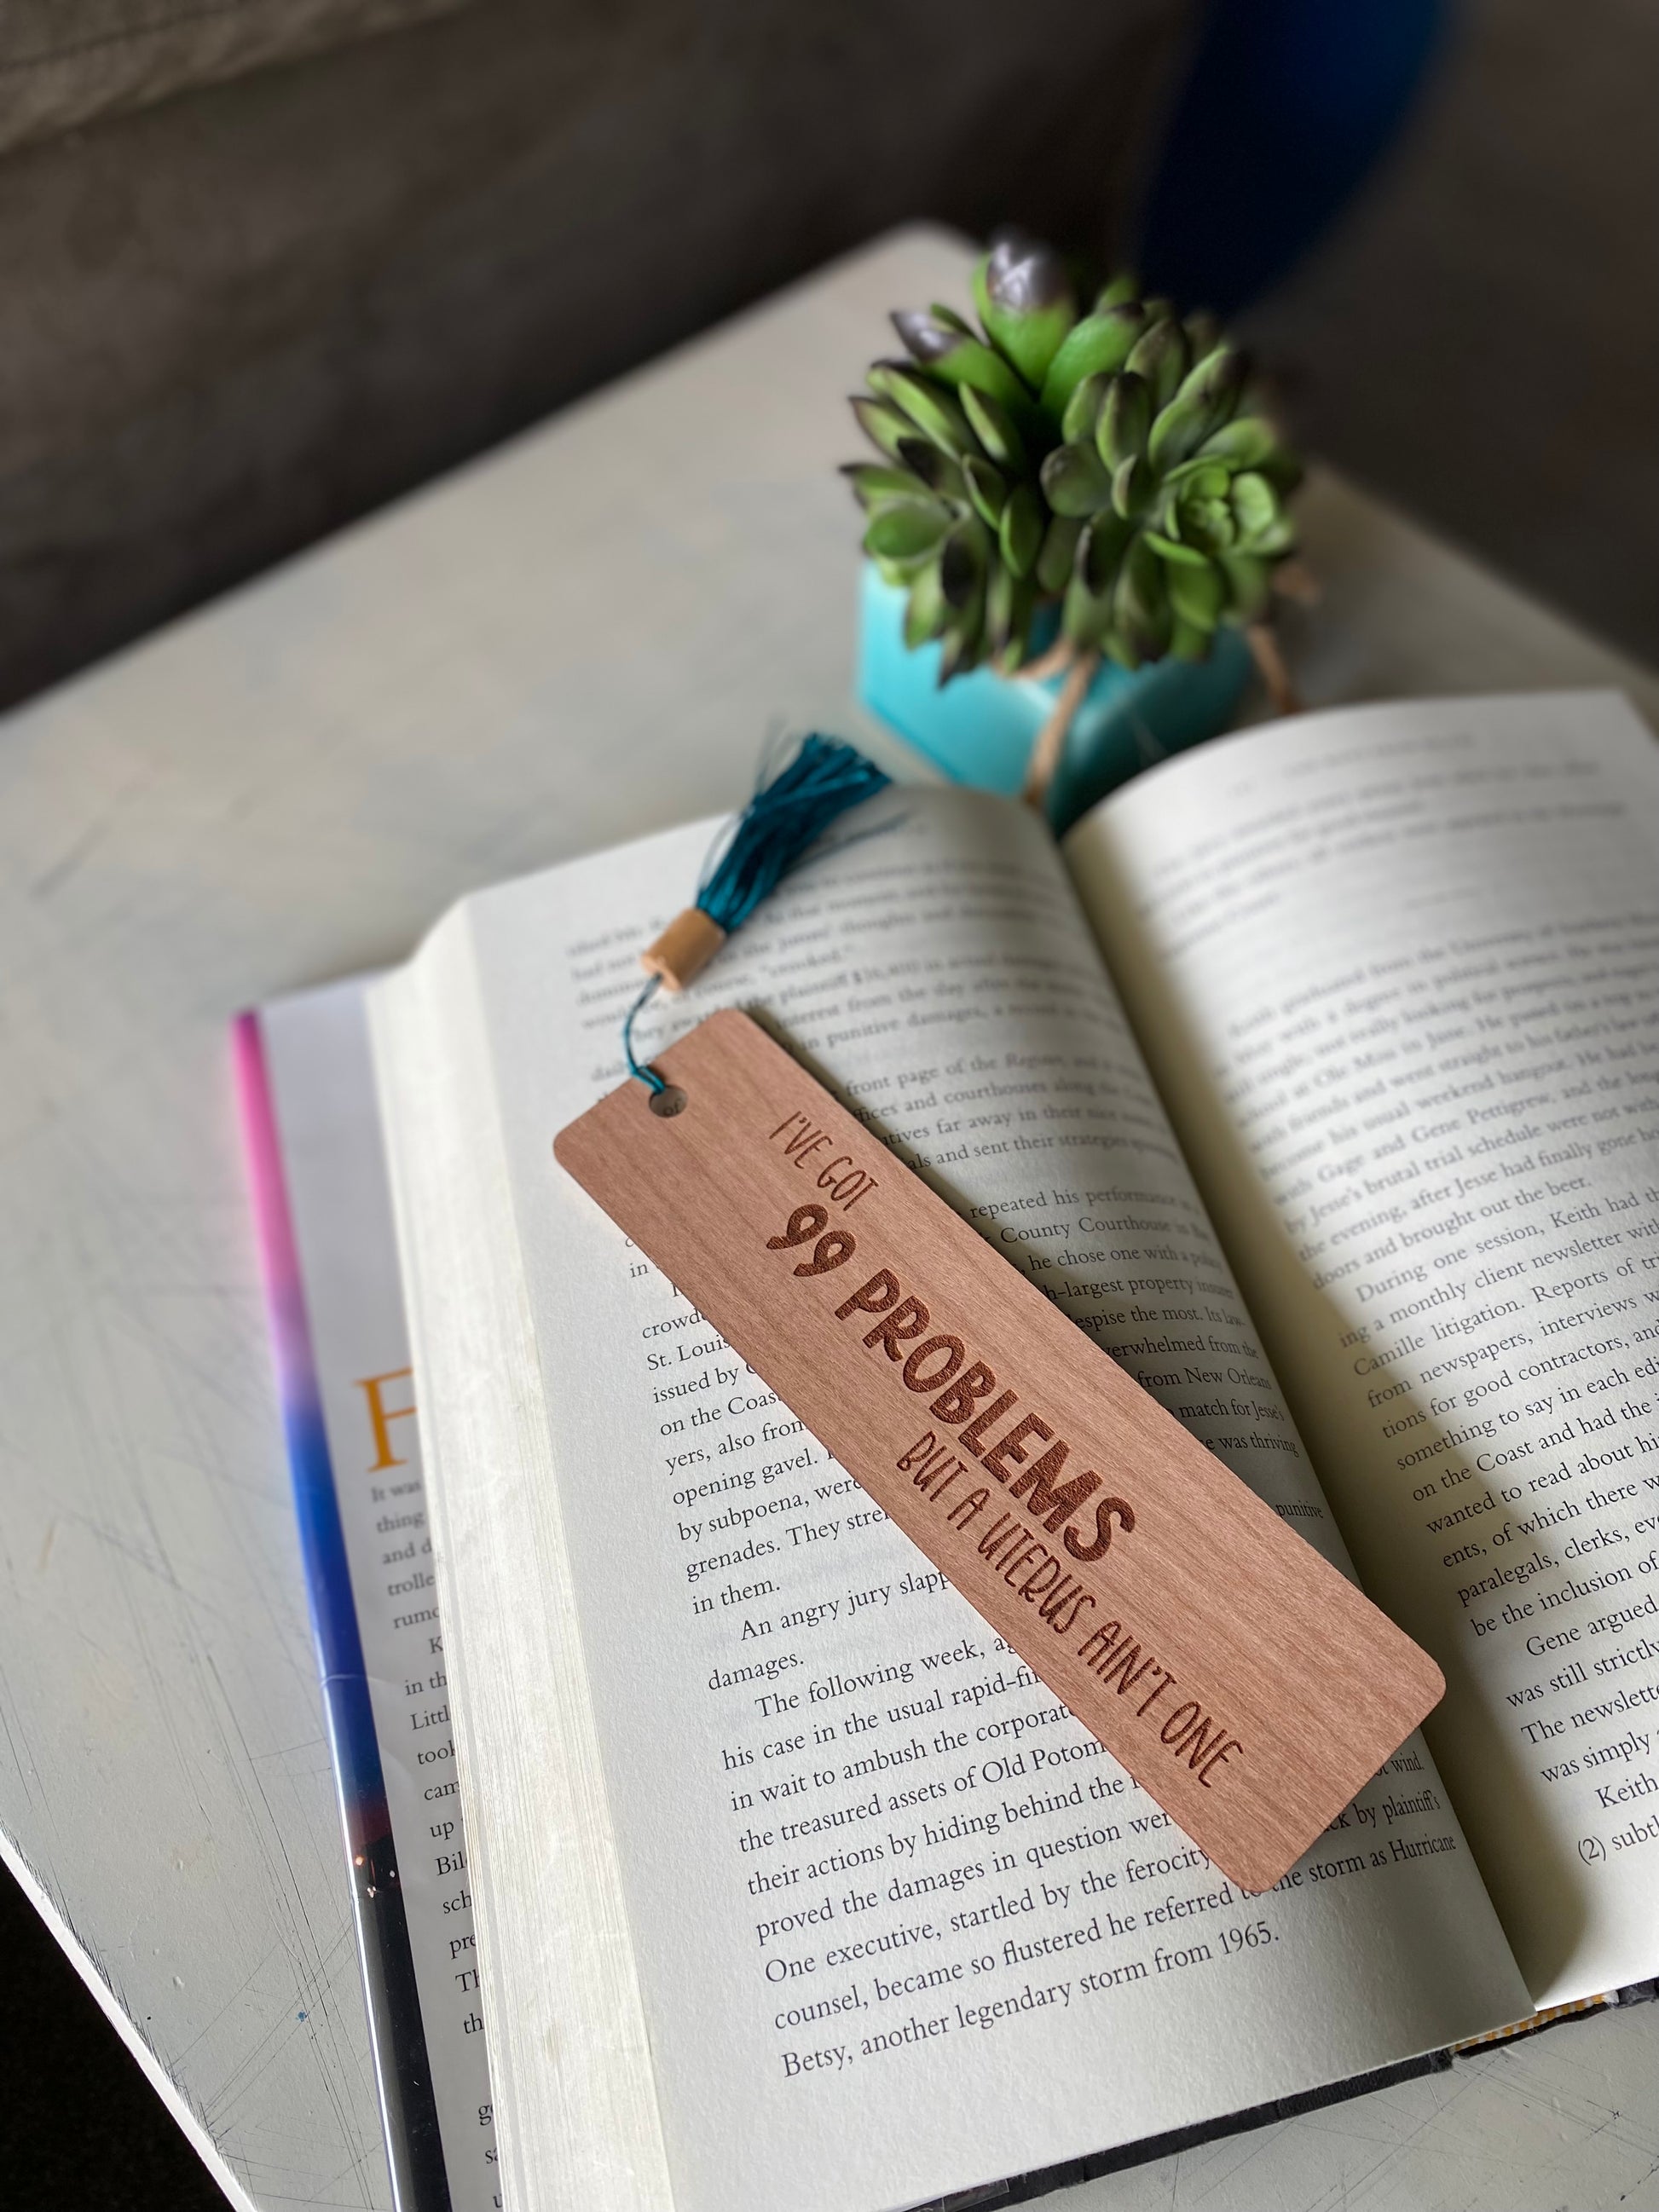 I've got 99 problems but a uterus ain't one - wood bookmark - funny hysterectomy gift - Novotny Designs